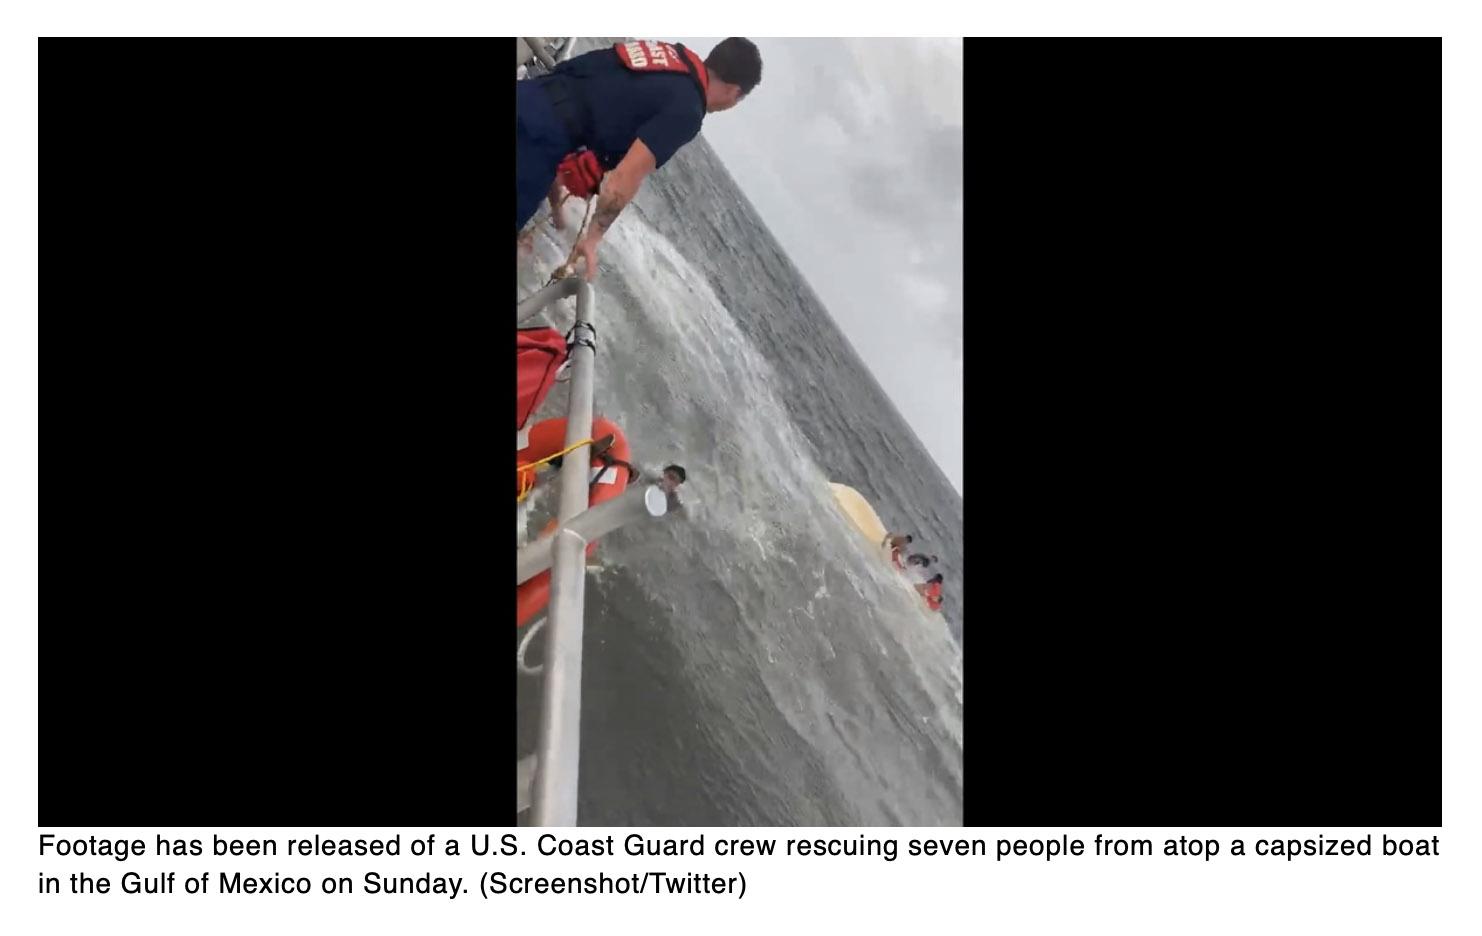  Watch the Coast Guard rescue seven people from a capsized boat